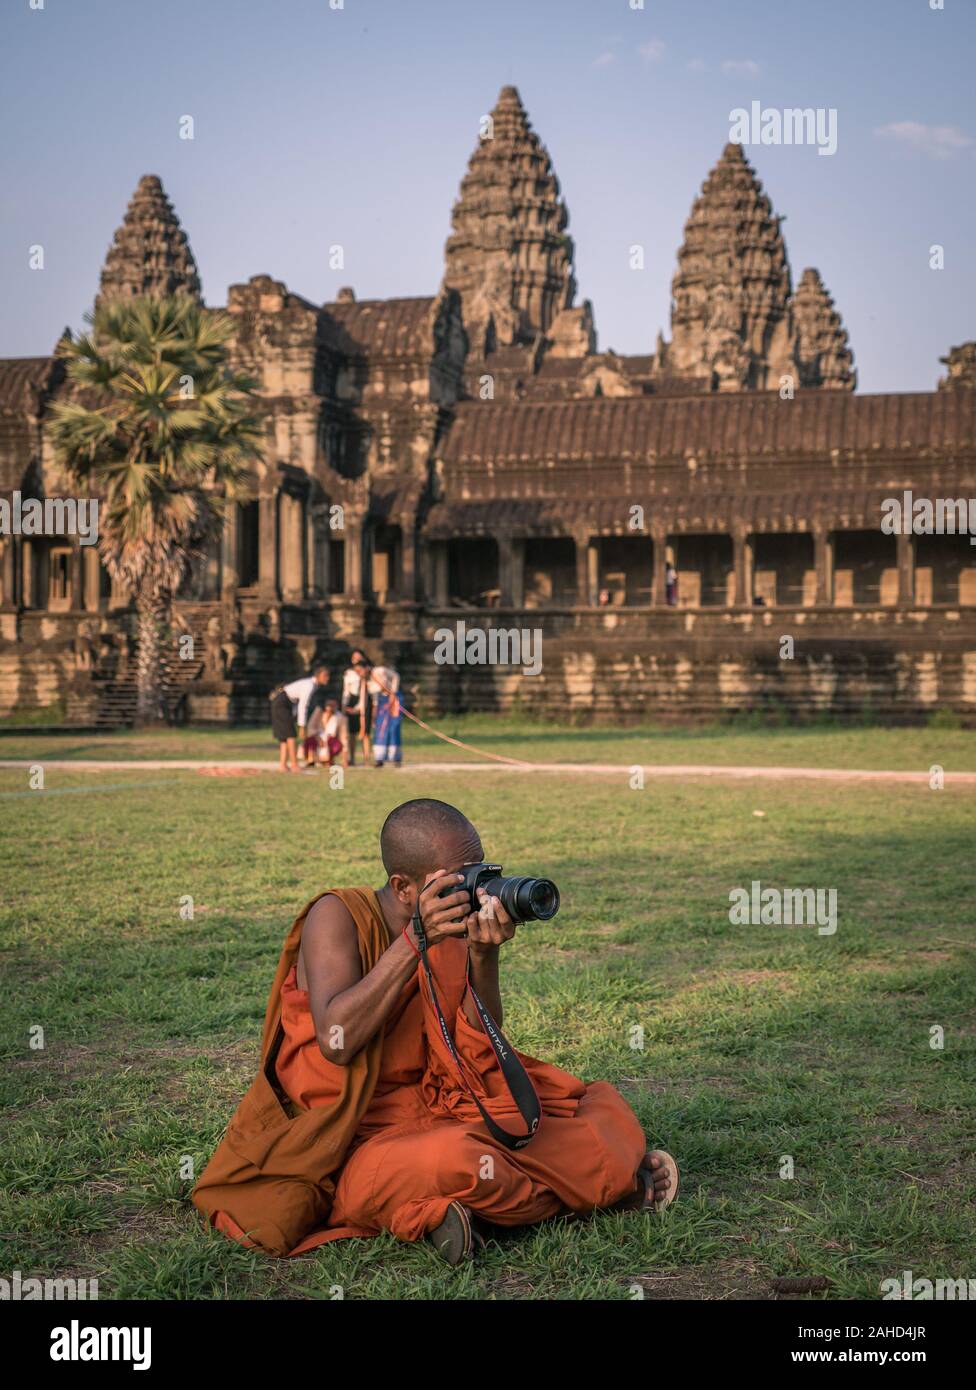 Buddhist monk in traditional orange robe taking photos infront of Angkor Wat temple, Siem Reap, Cambodia Stock Photo